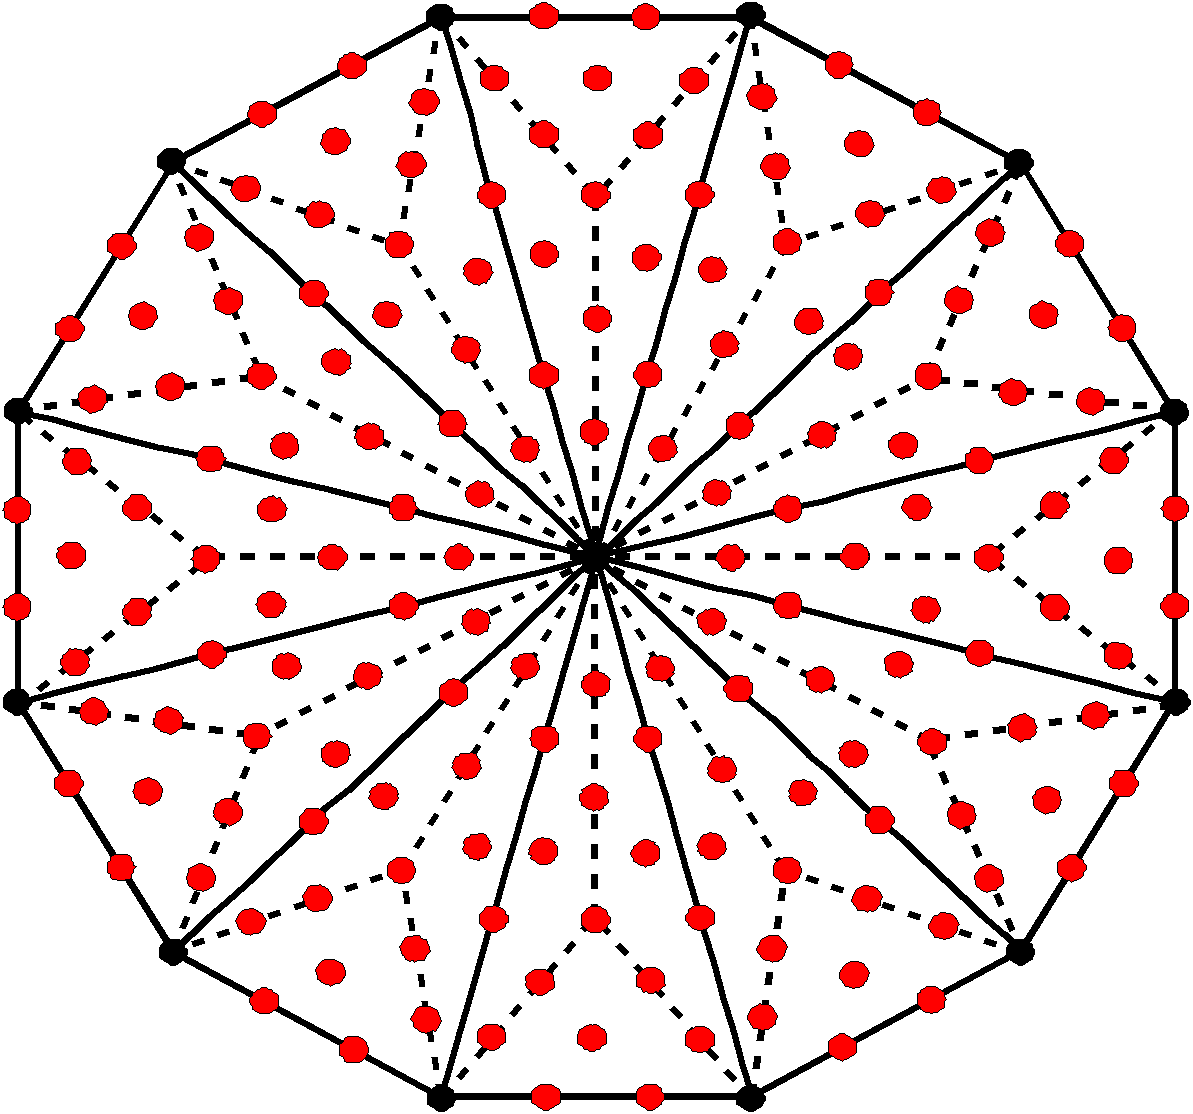 168 yods other than corners surround centre of Type B dodecagon